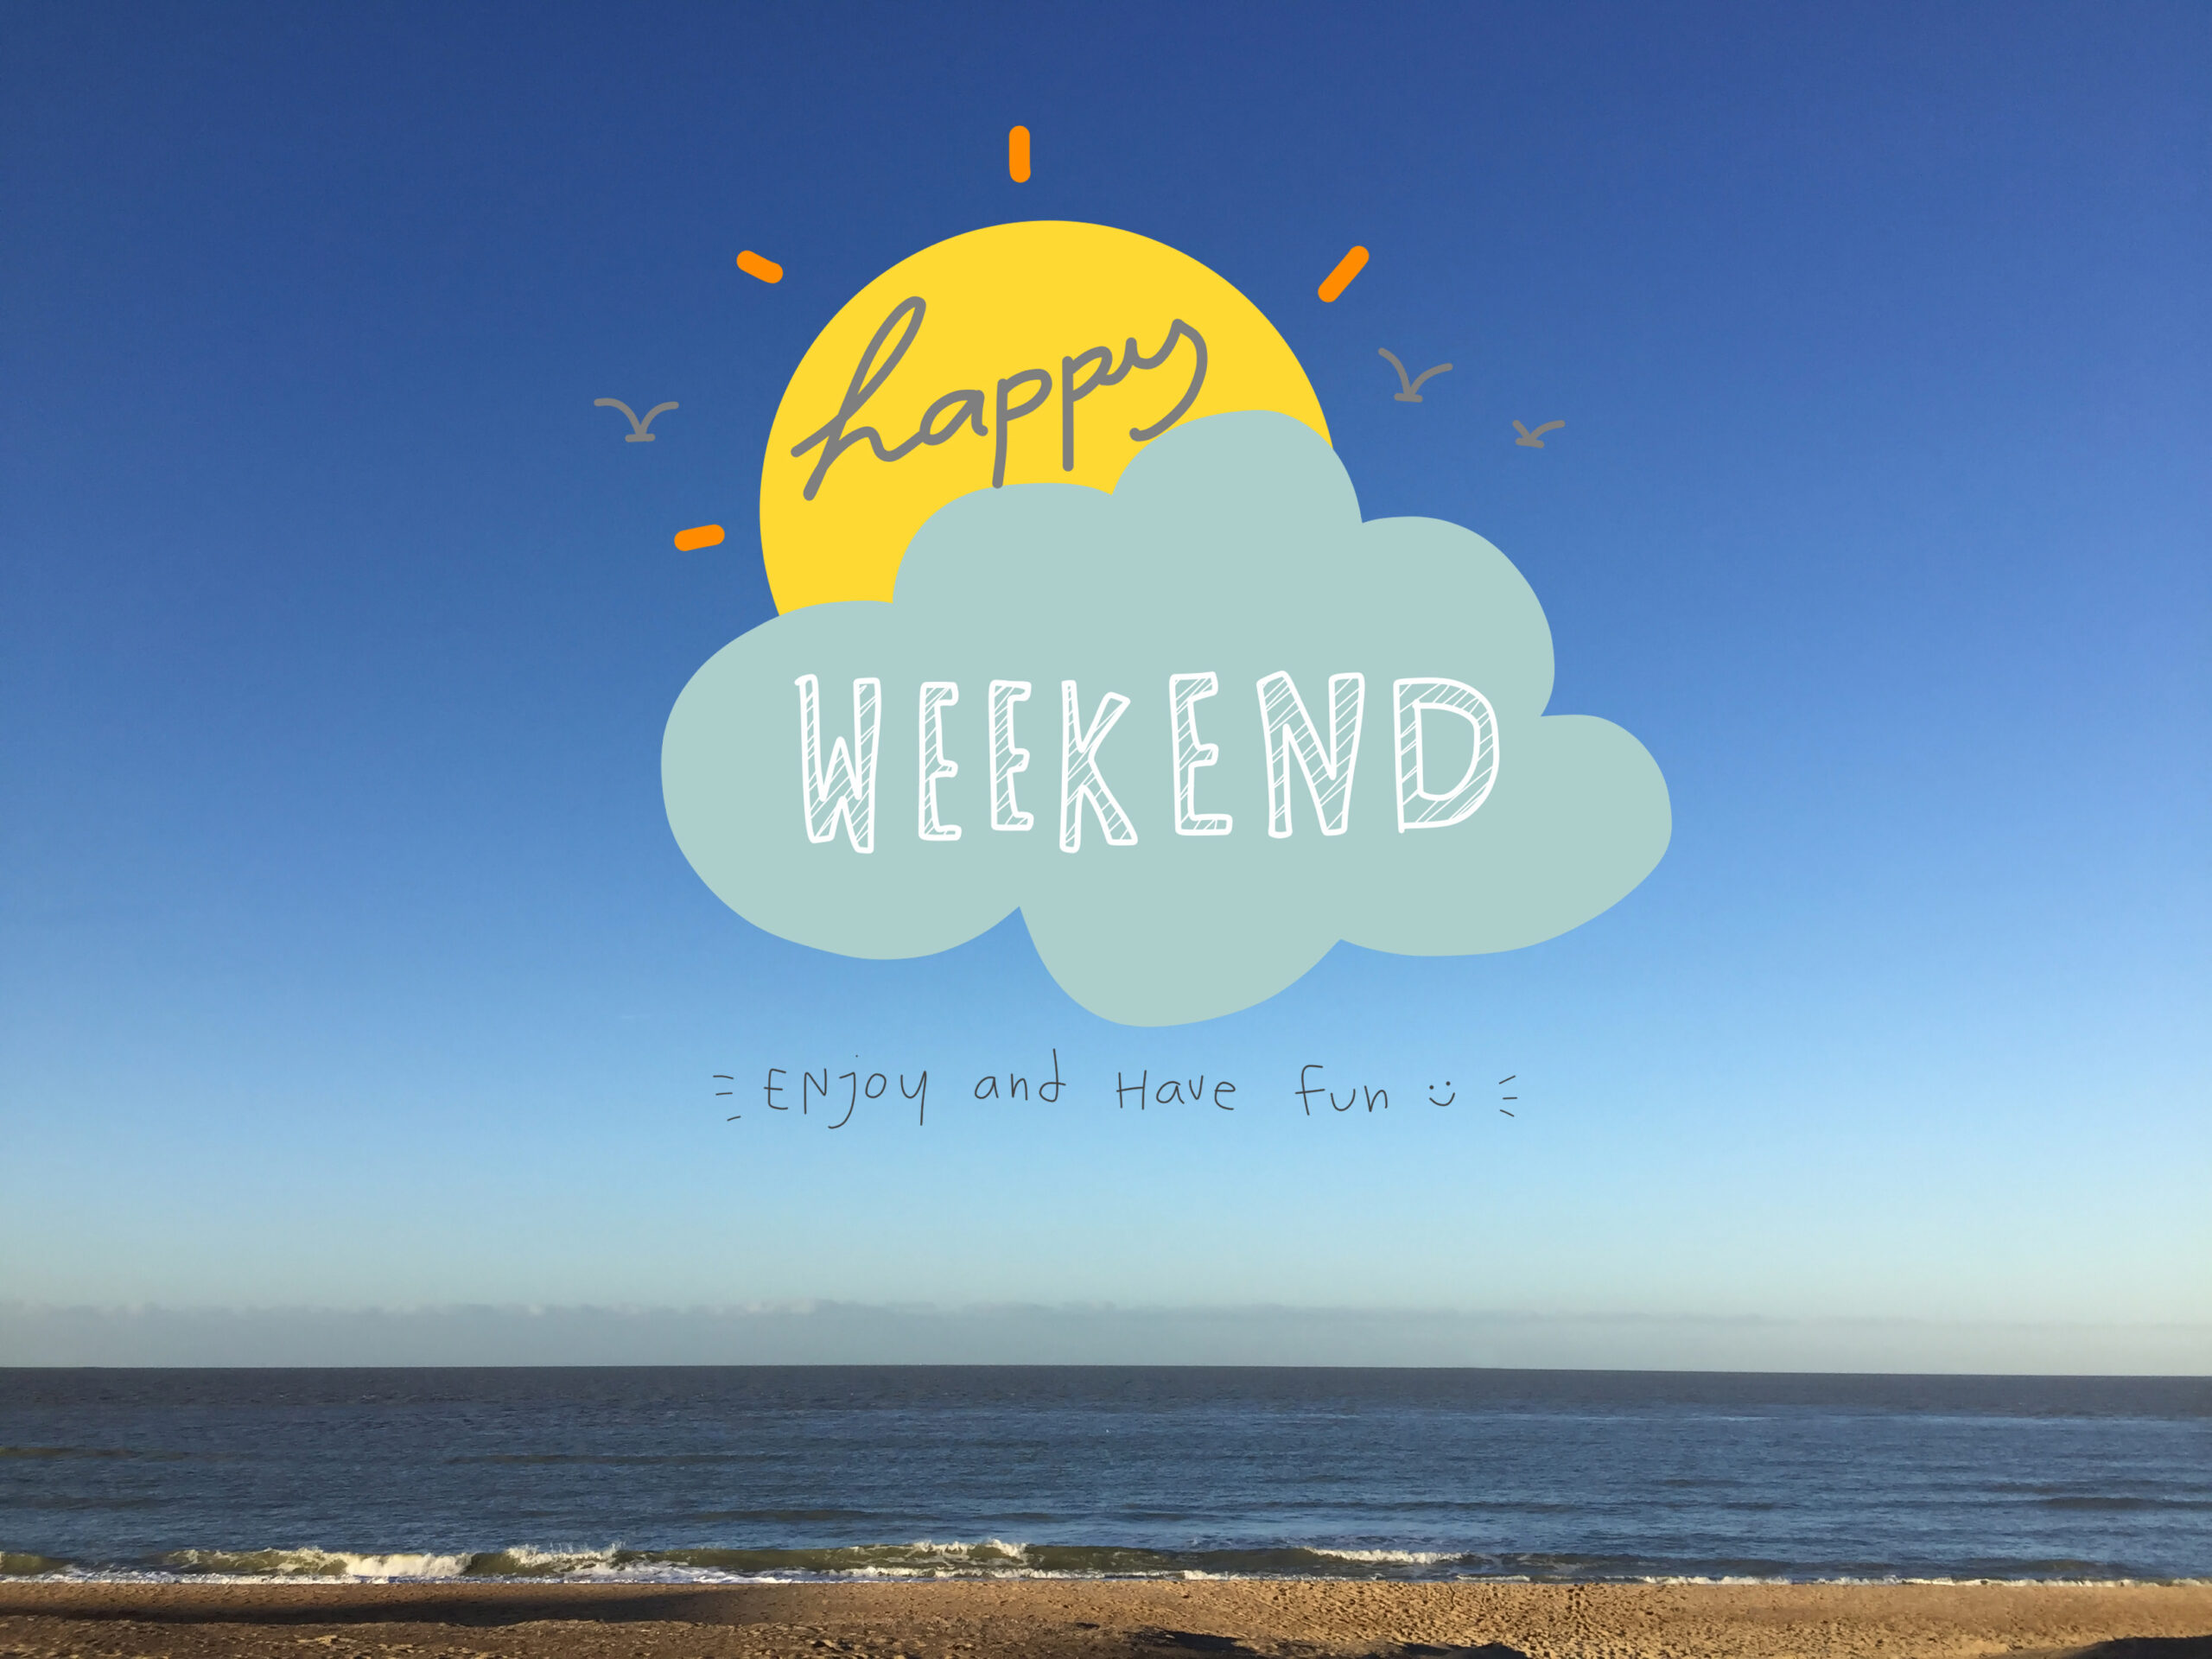 Happy weekend word on sun and cloud on beautiful blue sky and beach